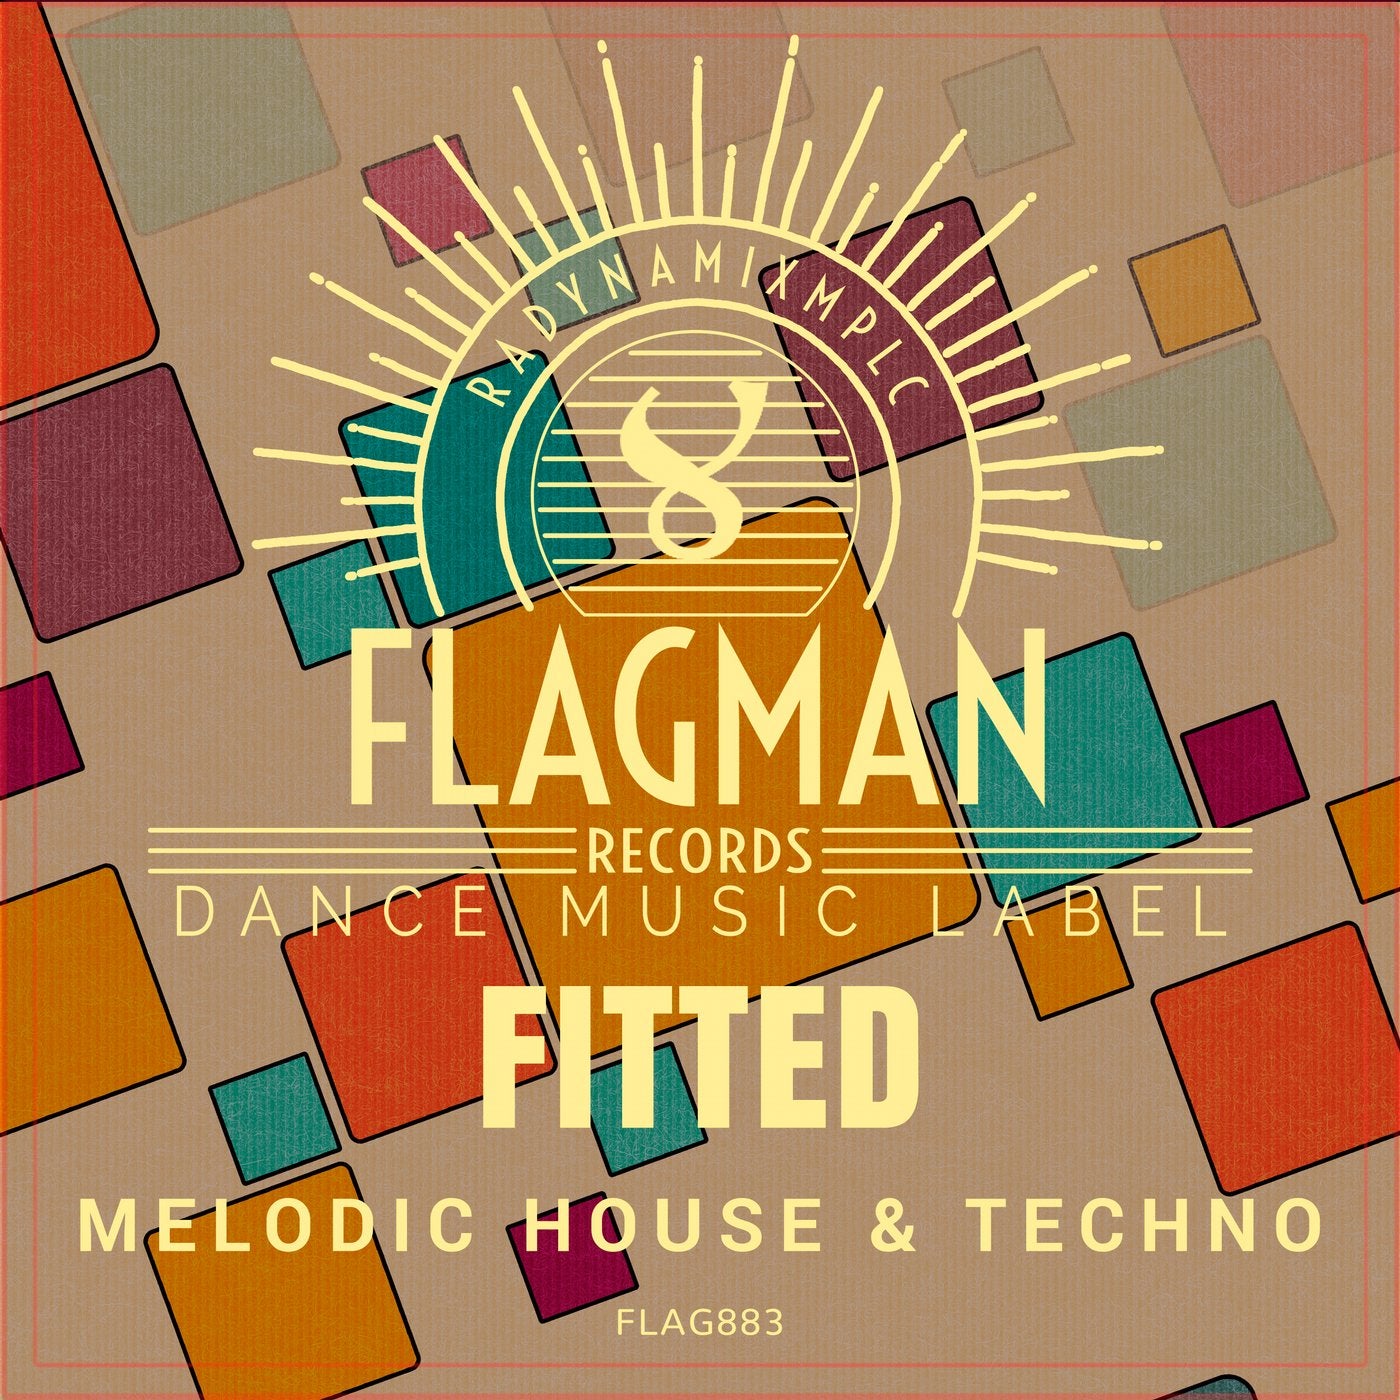 Fitted Melodic House & Techno